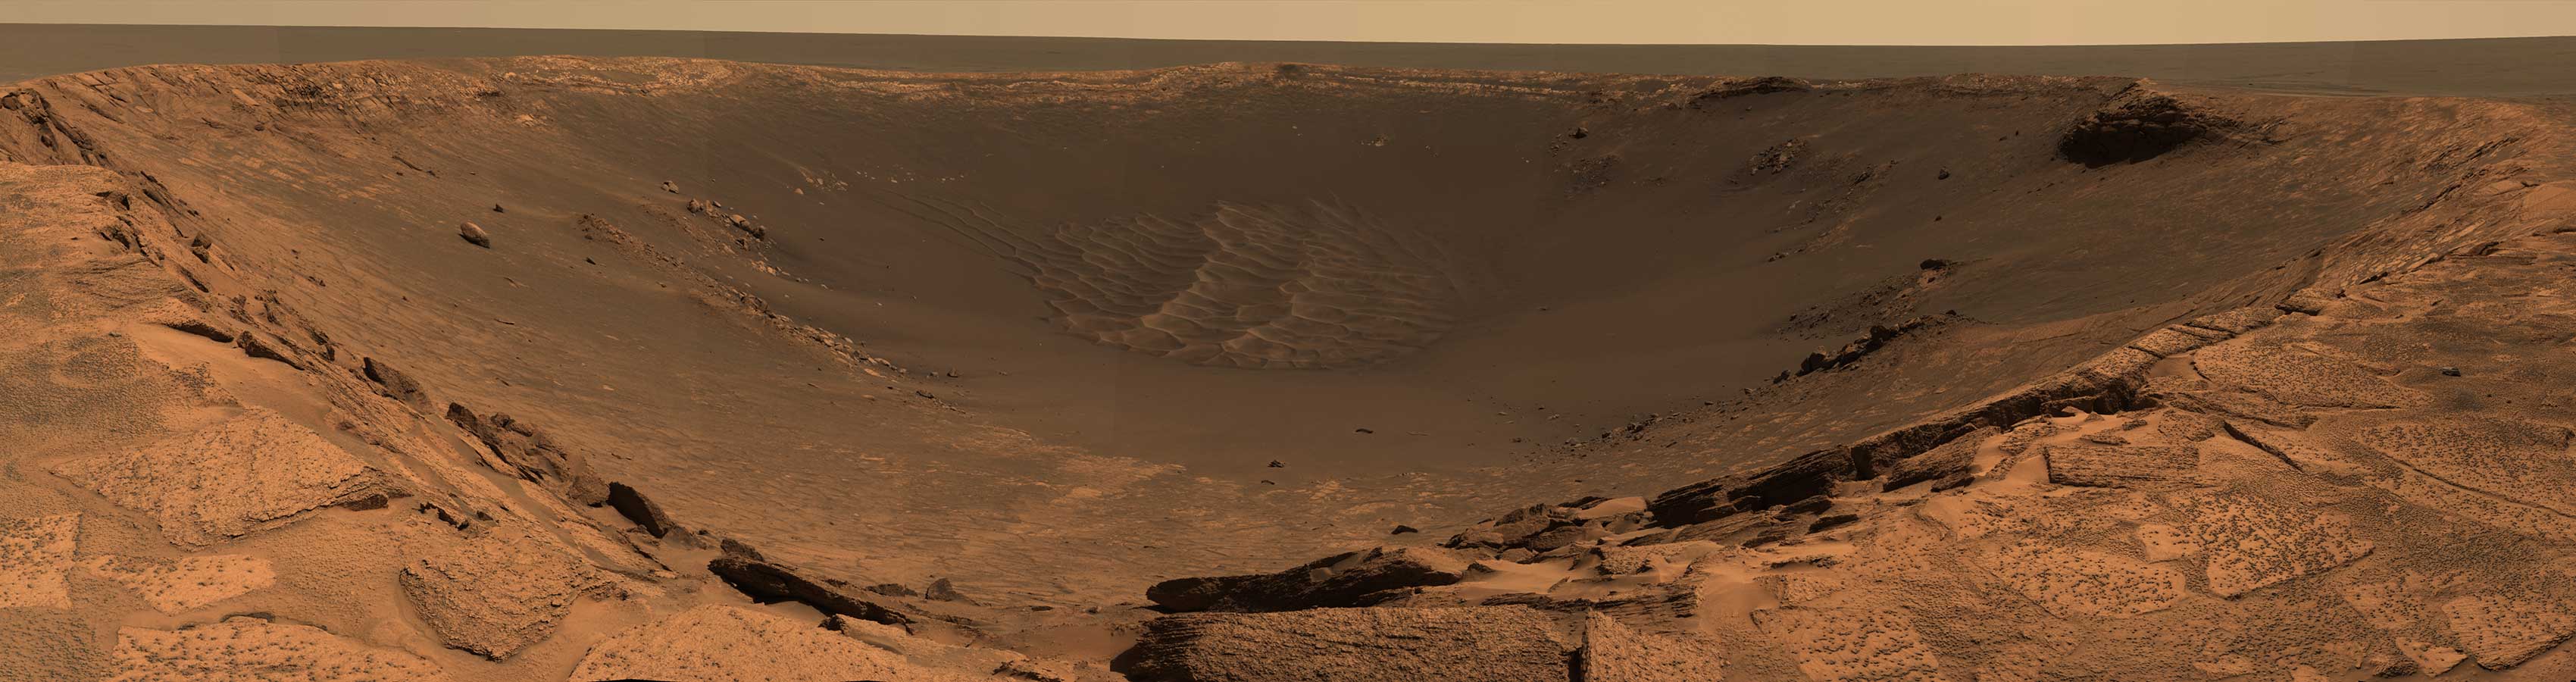 A wide panorama of Mars shows the rim of a vast crater.